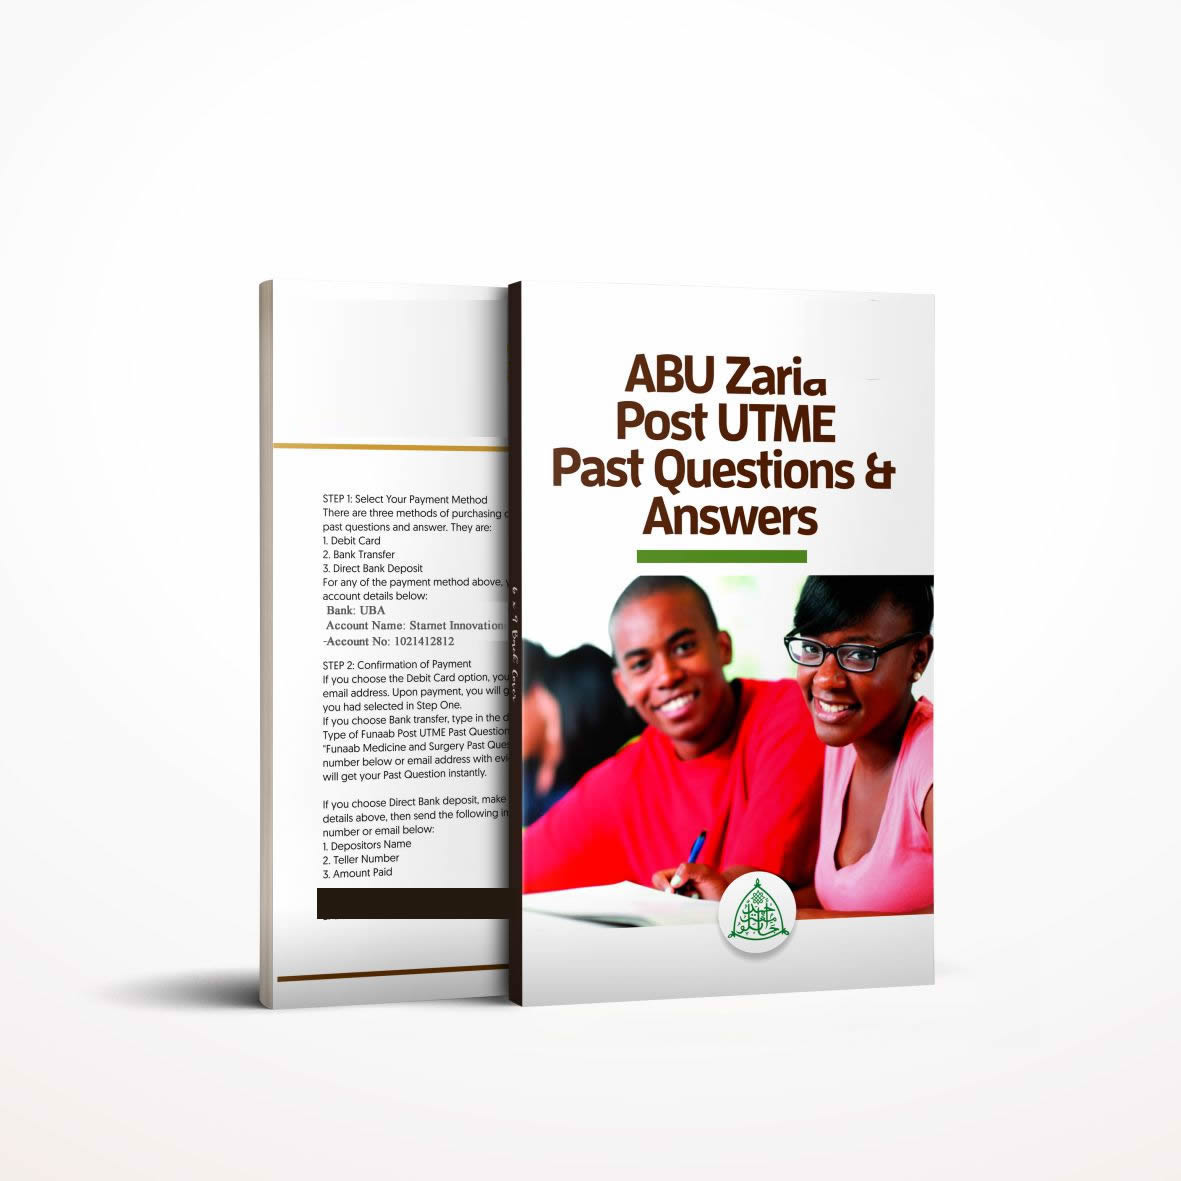 ABU Zaria post utme past questions and answers